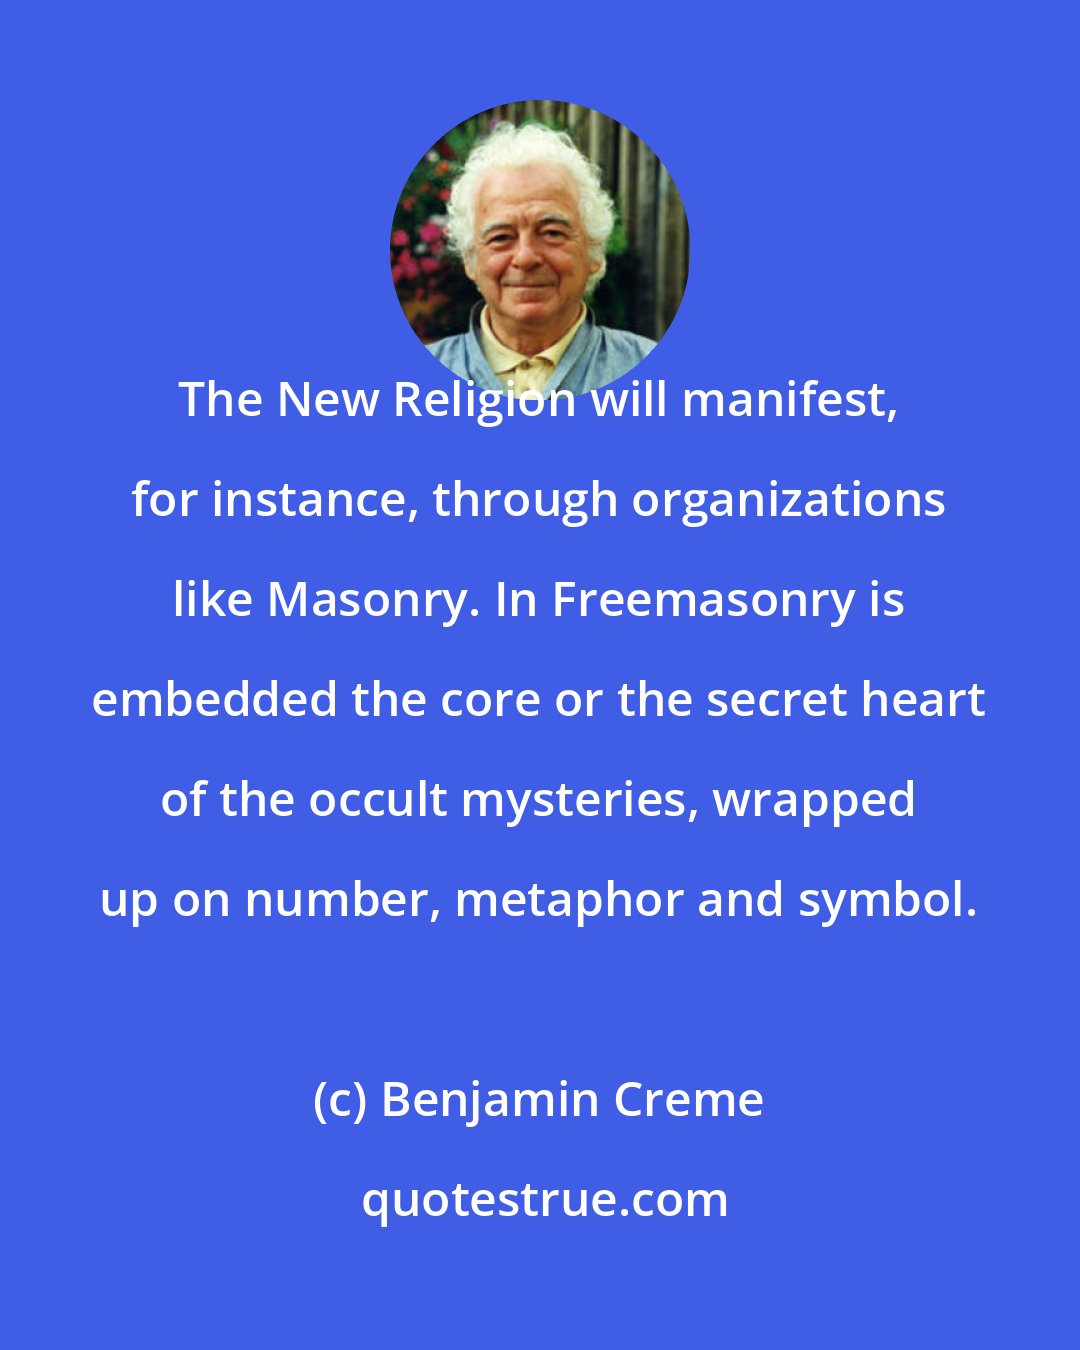 Benjamin Creme: The New Religion will manifest, for instance, through organizations like Masonry. In Freemasonry is embedded the core or the secret heart of the occult mysteries, wrapped up on number, metaphor and symbol.